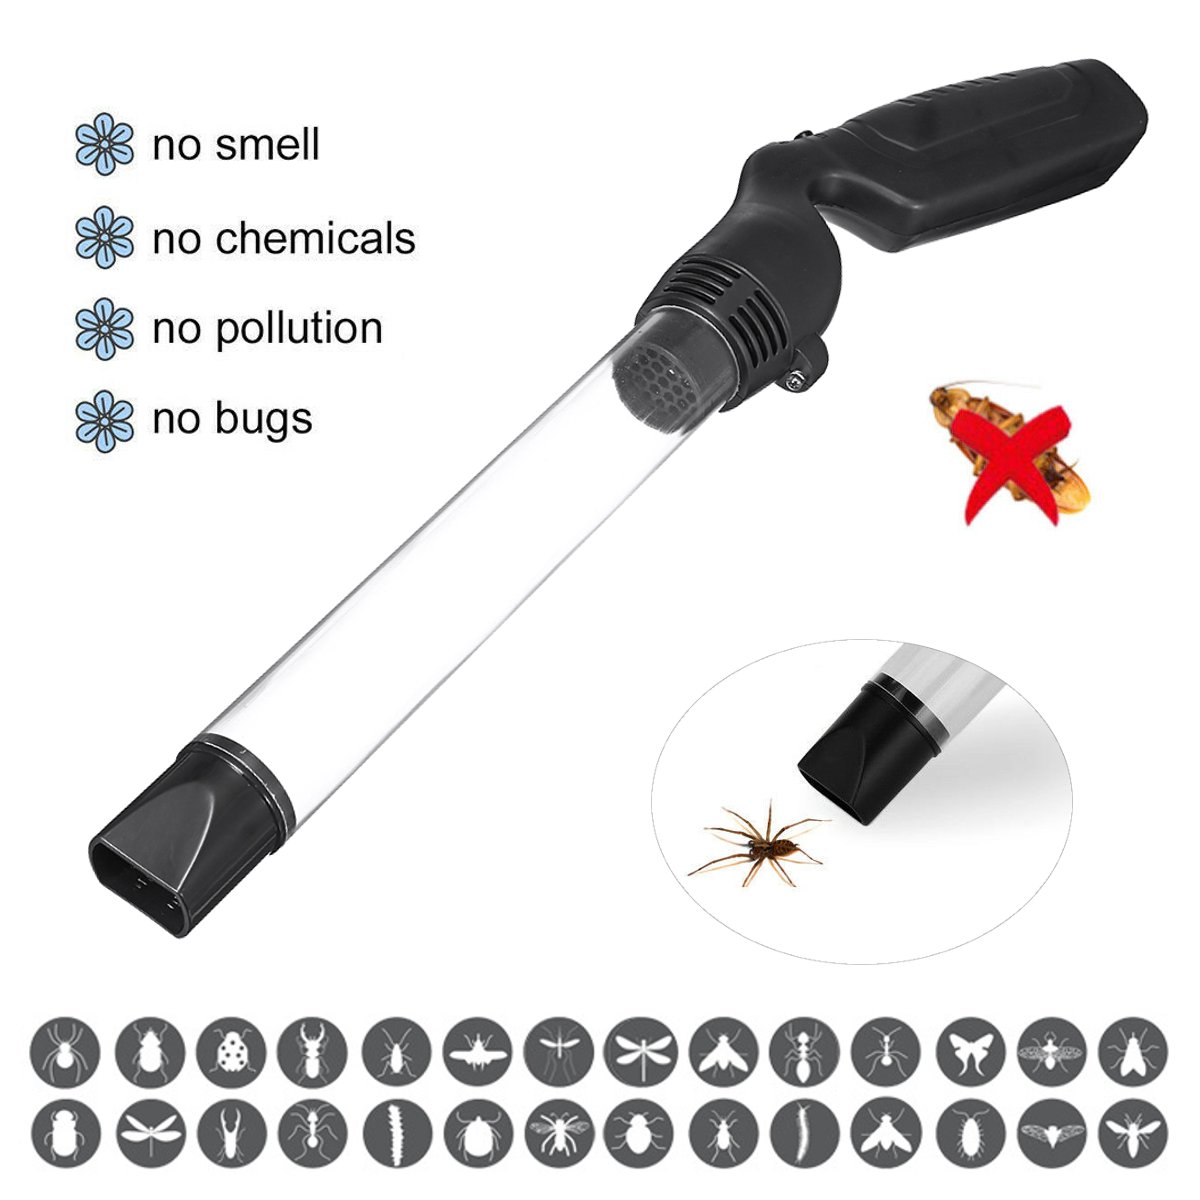 Spider-Insects-Trap-Vacuum-LED-Suction-Catcher-Portable-Fly-Bugs-Buster-Battery-Catcher-No-Harm-Pest-1582668-1